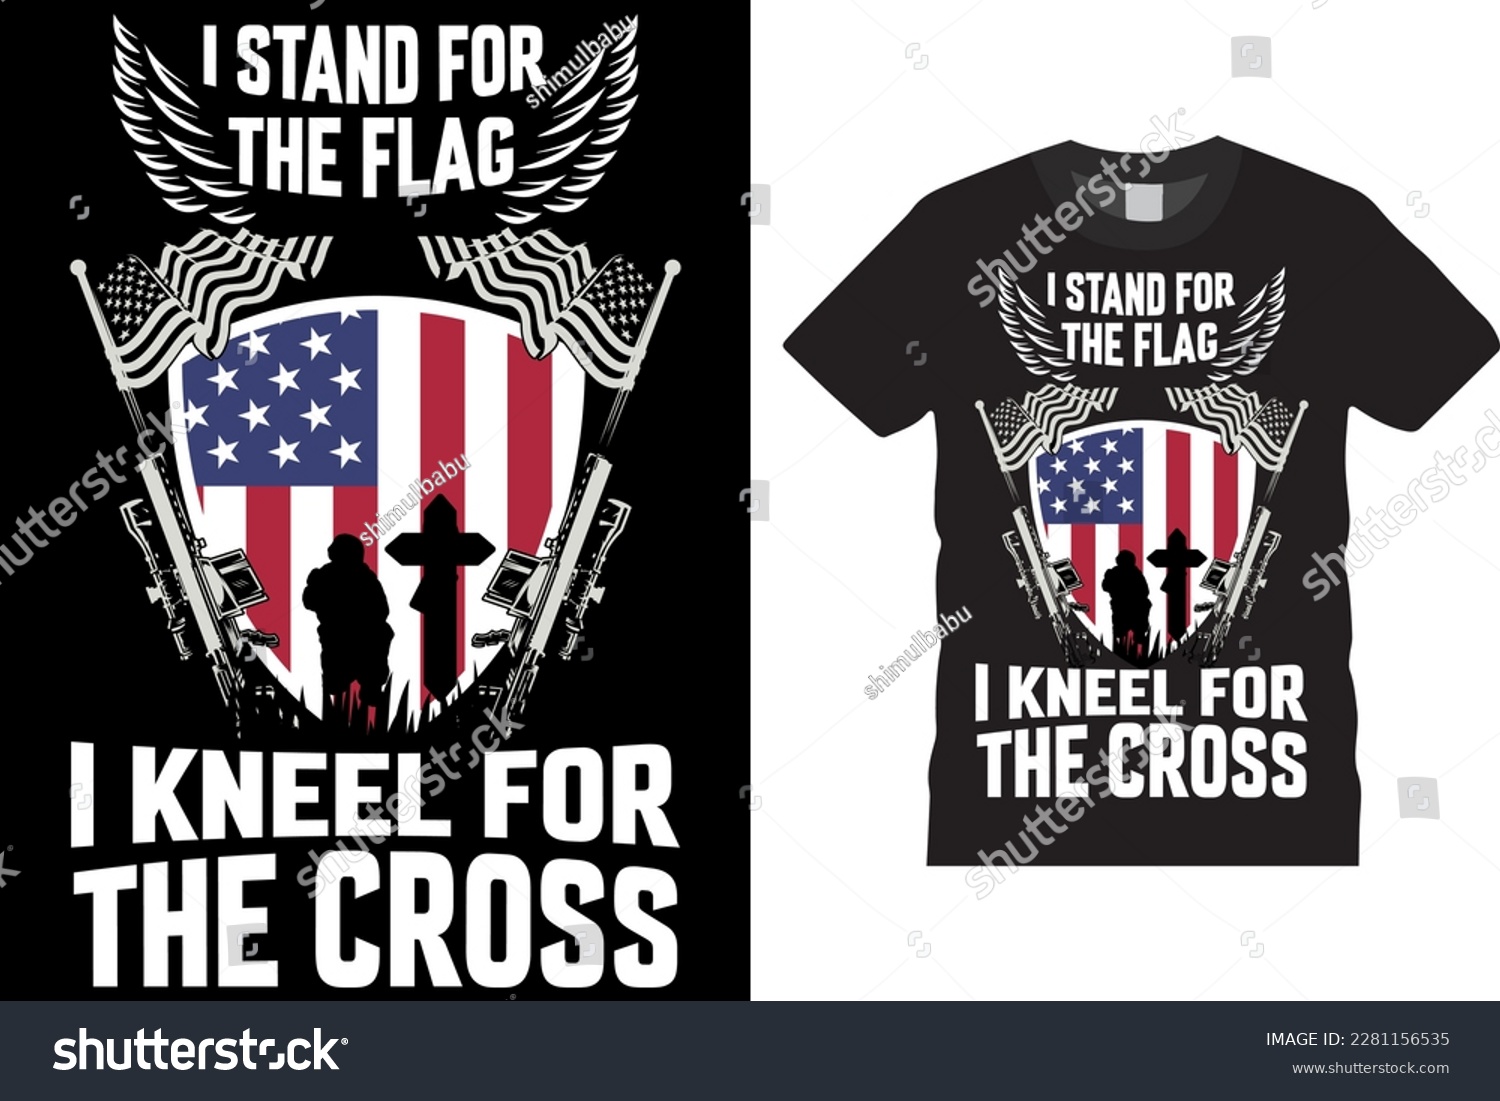 SVG of STAND FOR THE FLAG, STAND FOR THE KNEEL VERSATILE JOURNAL WITH DISTRESSED AMERICAN FLAG SUBLIMATION T-SHIRTS DESIGN VECTOR TEMPLATE  printed on poster, banner, apparel, merchandise  svg